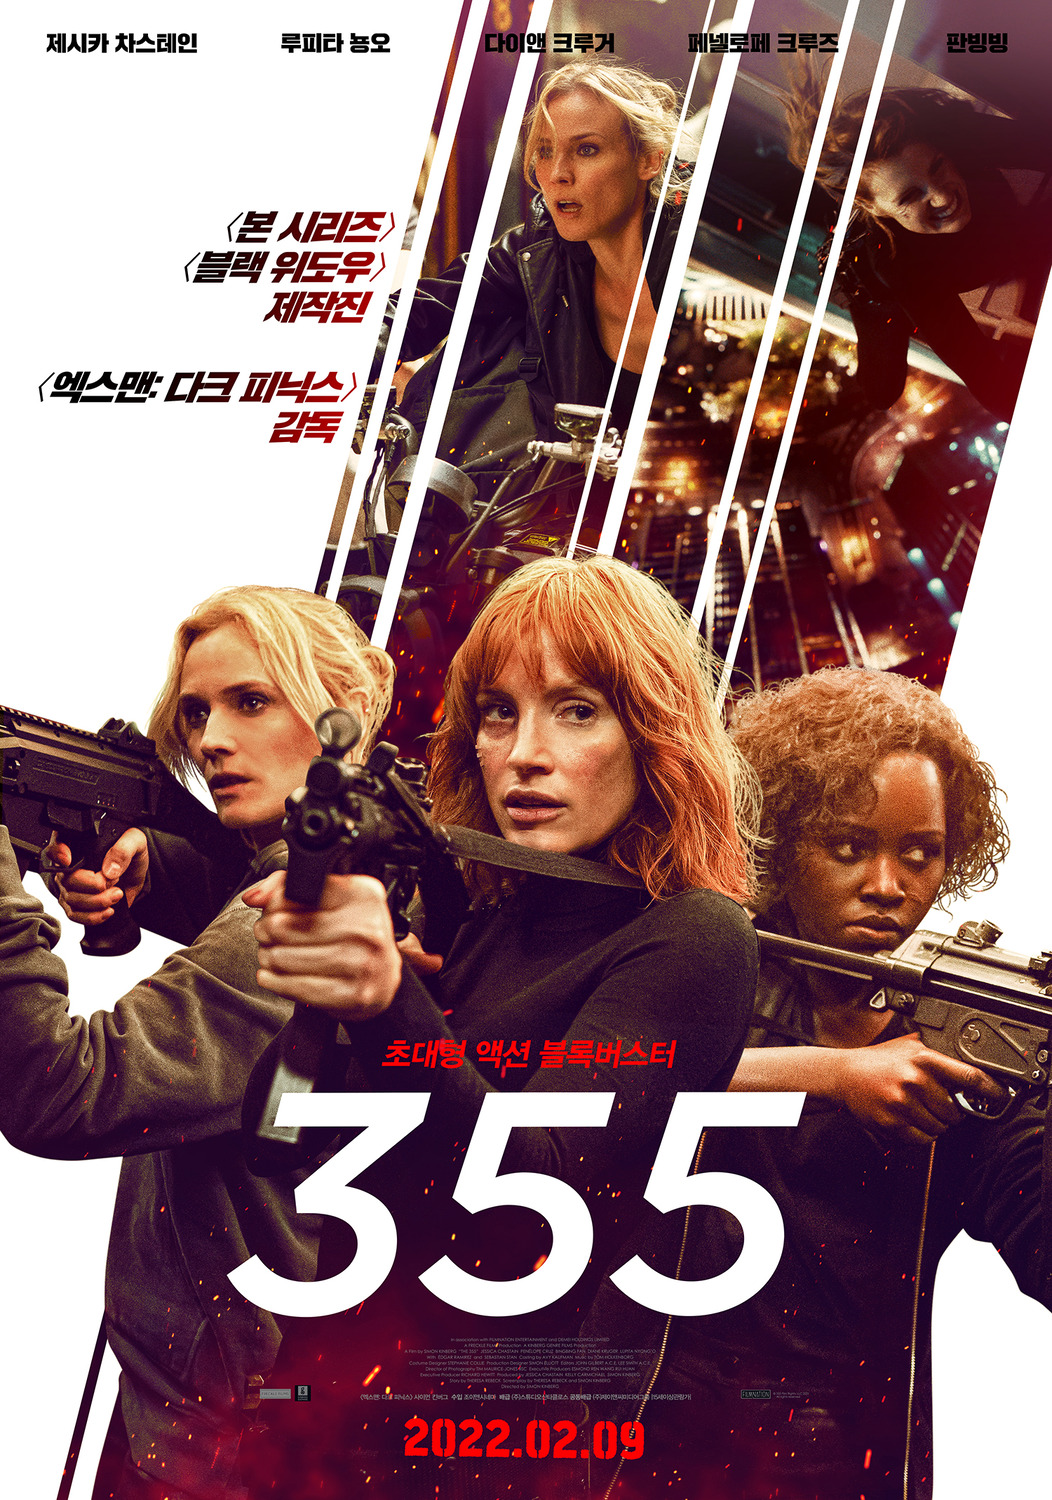 Extra Large Movie Poster Image for The 355 (#14 of 15)